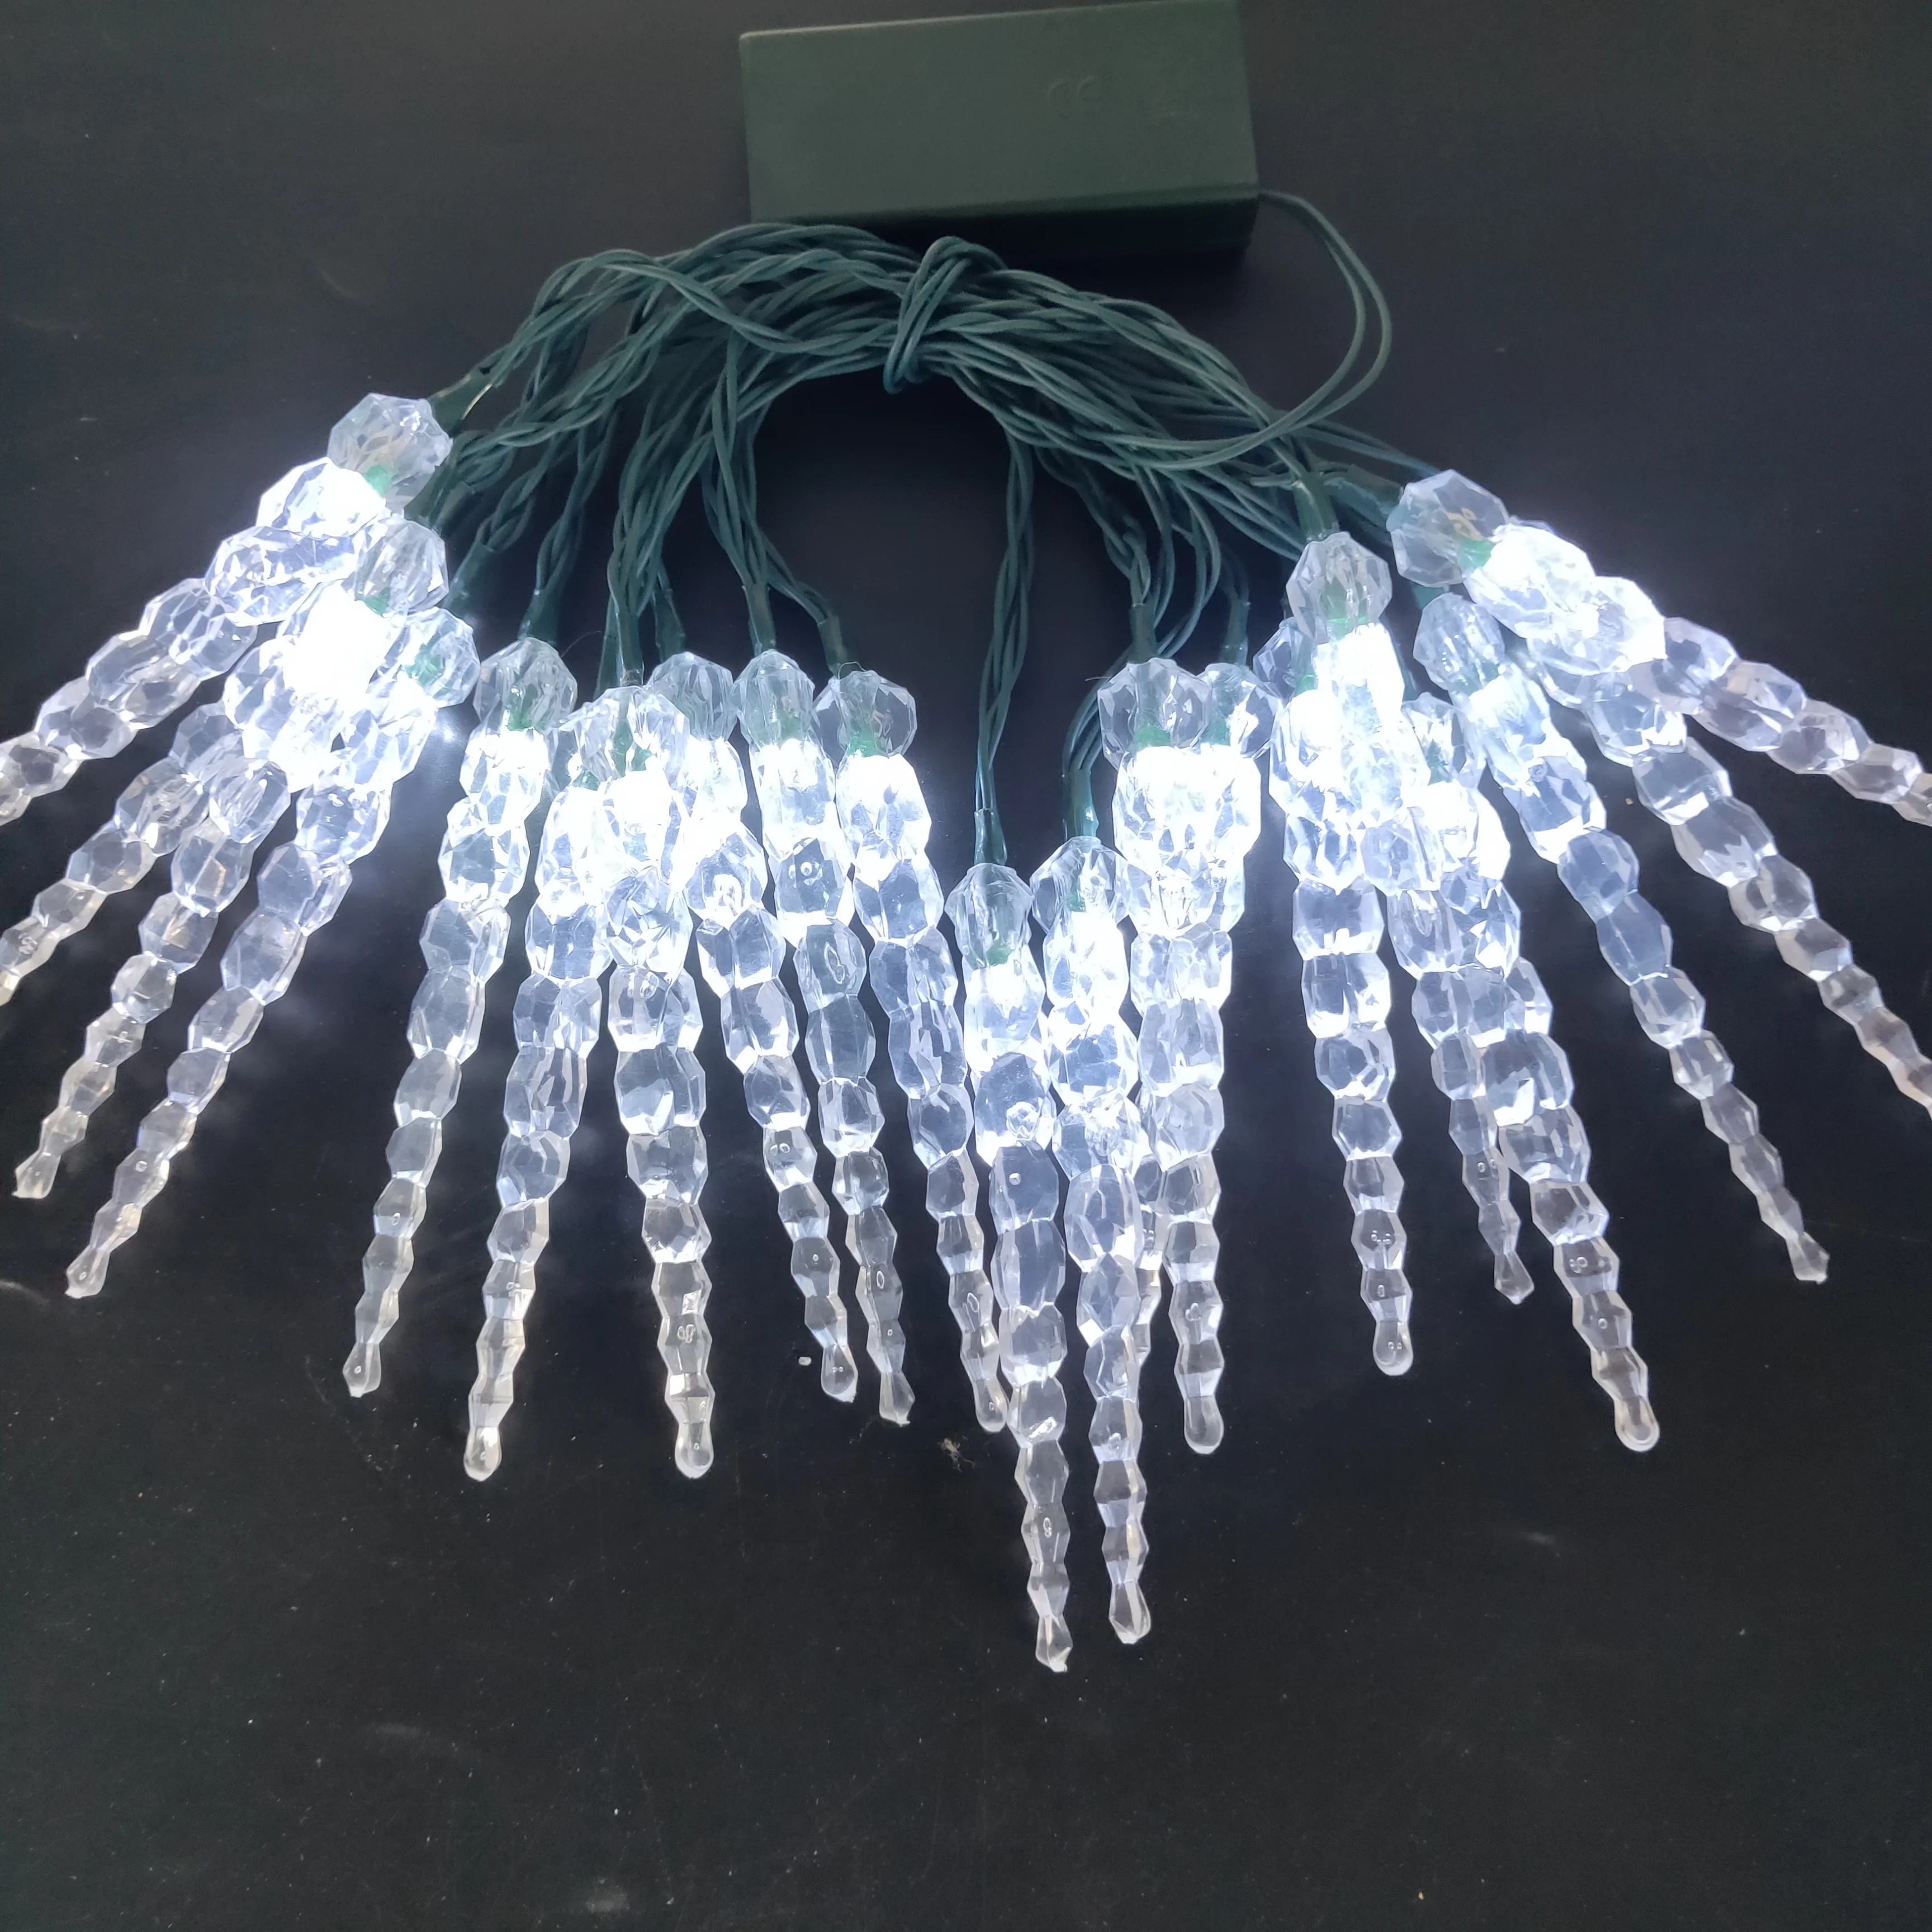 10 icicle battery operated light, easter lights. festival battery lights.indoor use